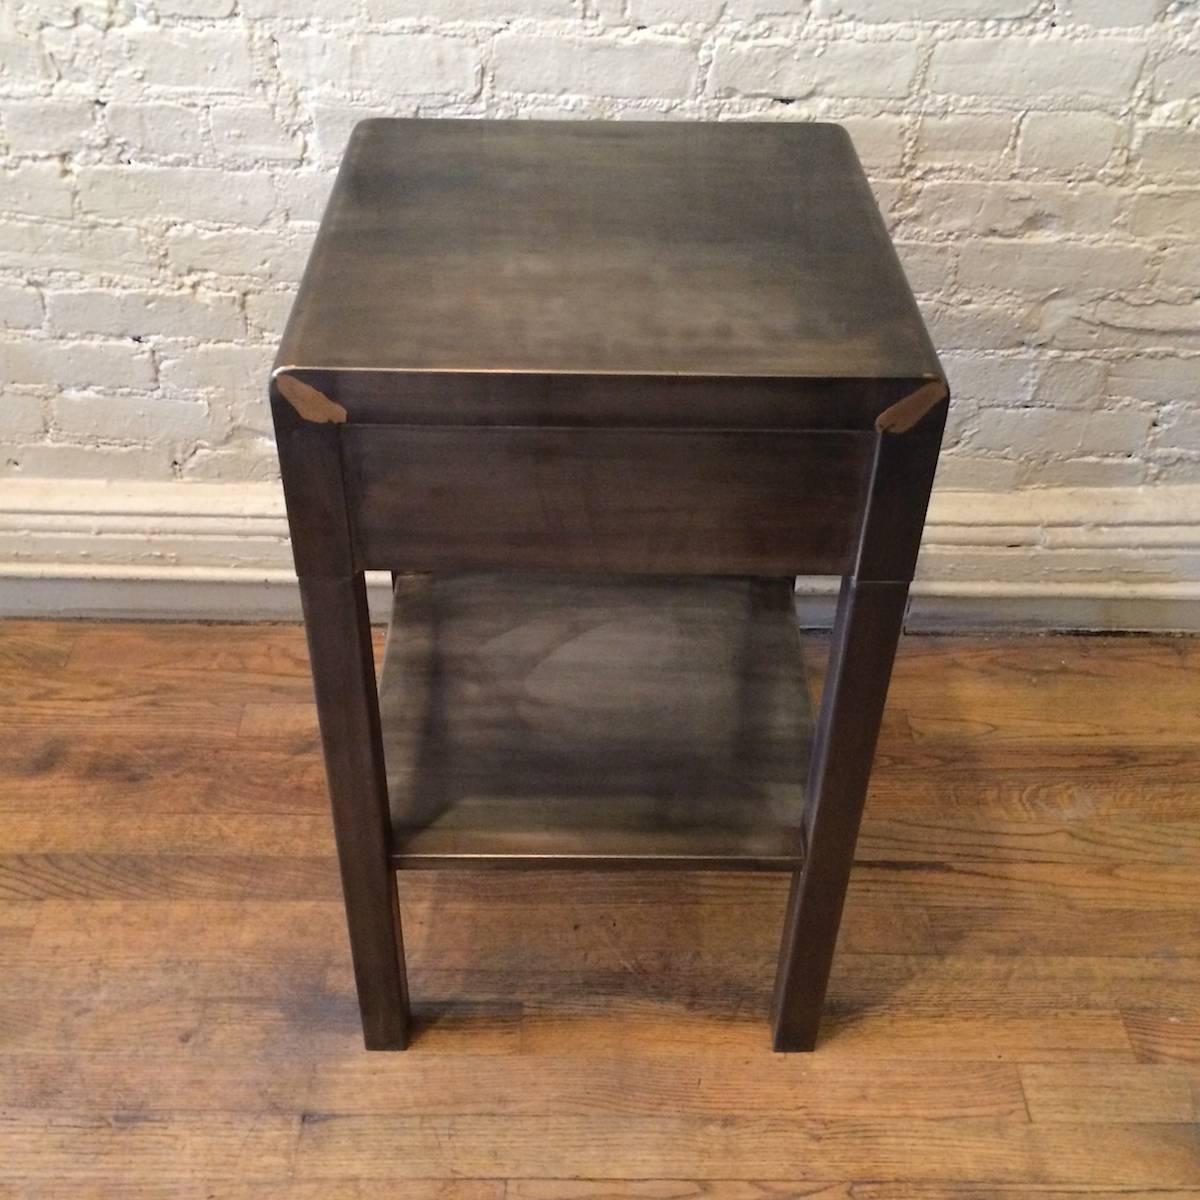 Machine Age Gunmetal Brushed Steel Side Table by Norman Bel Geddes for Simmons